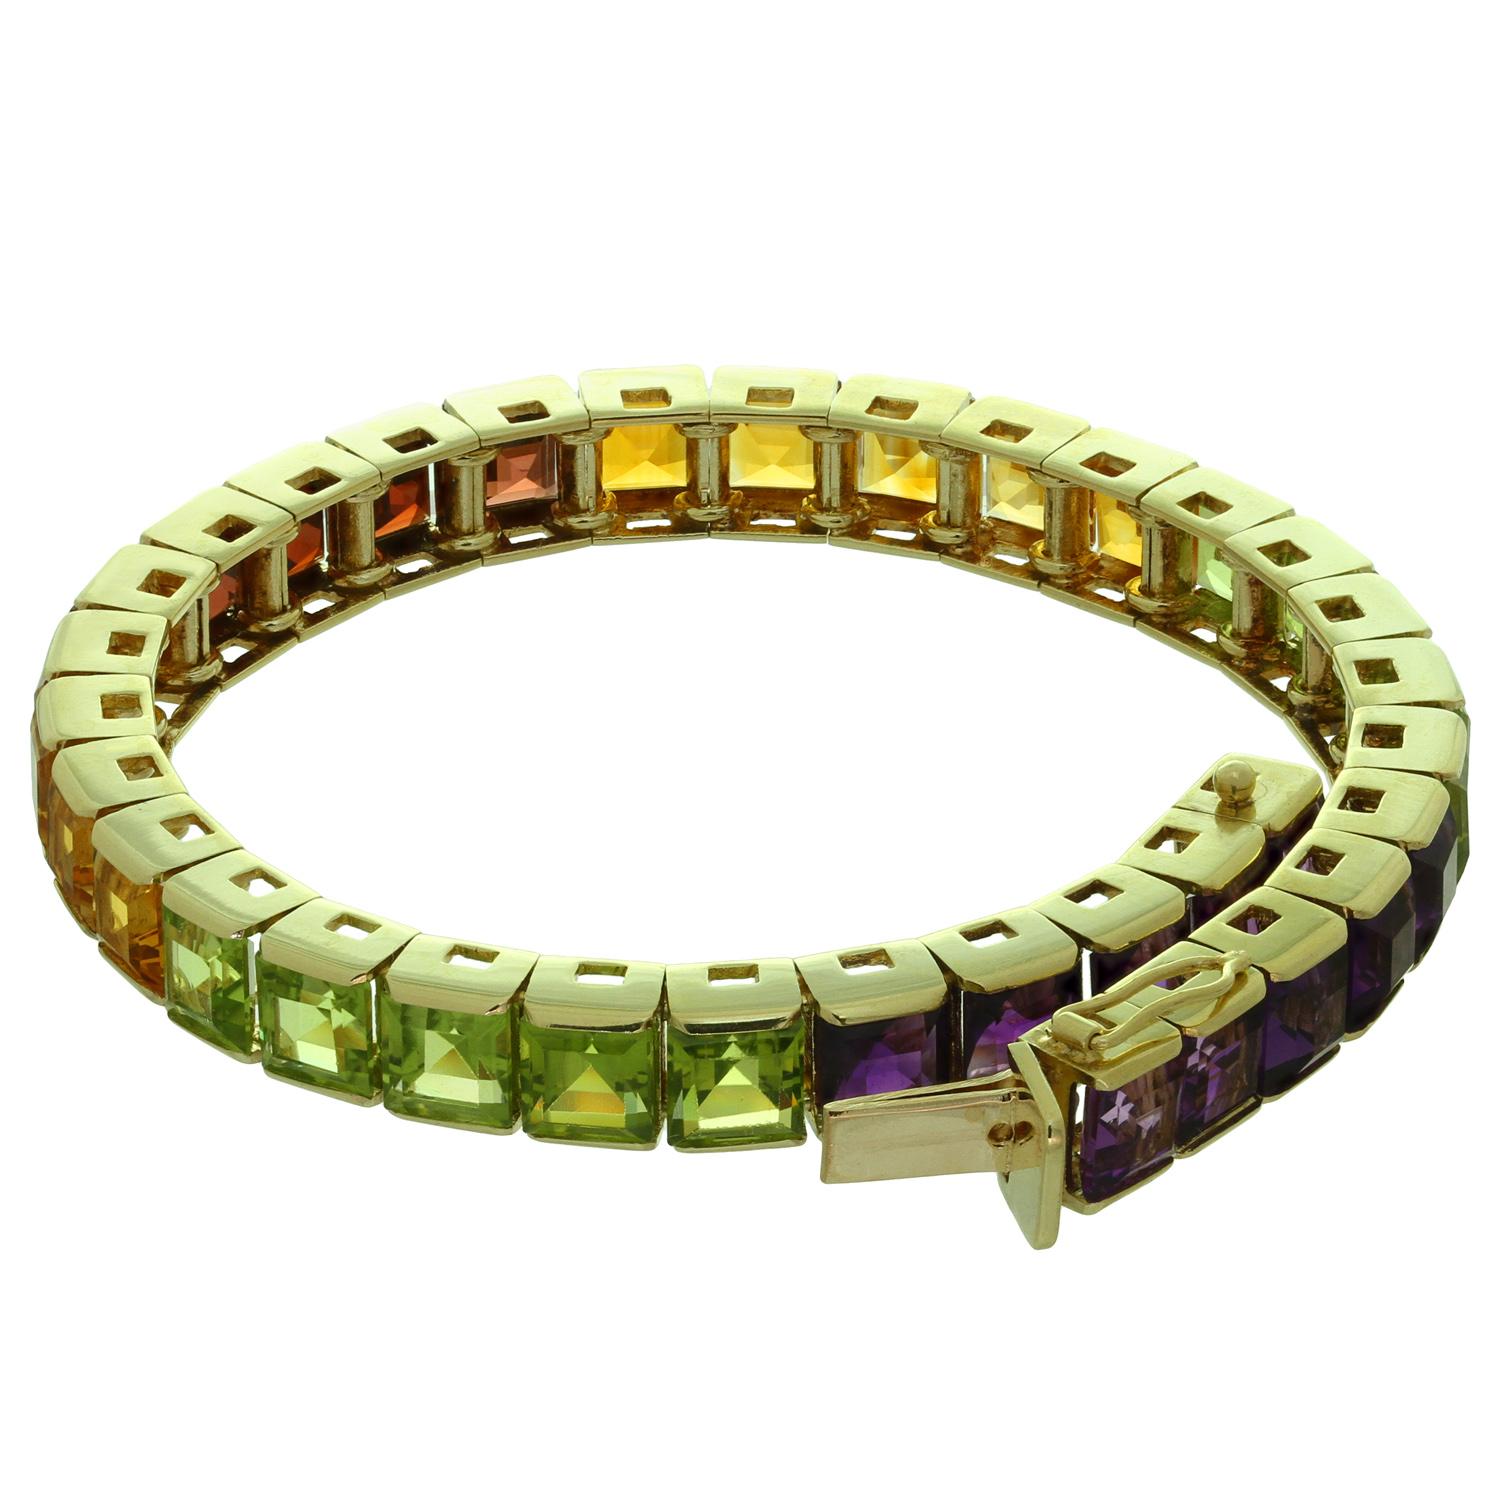 This colorful vibrant rainbow bracelet features 18k yellow gold square links beautifully set with a perfect selection of natural square-cut gemstones - amethyst, citrine, peridot and garnet. Made in United States circa 1980s.  Measurements: 0.23